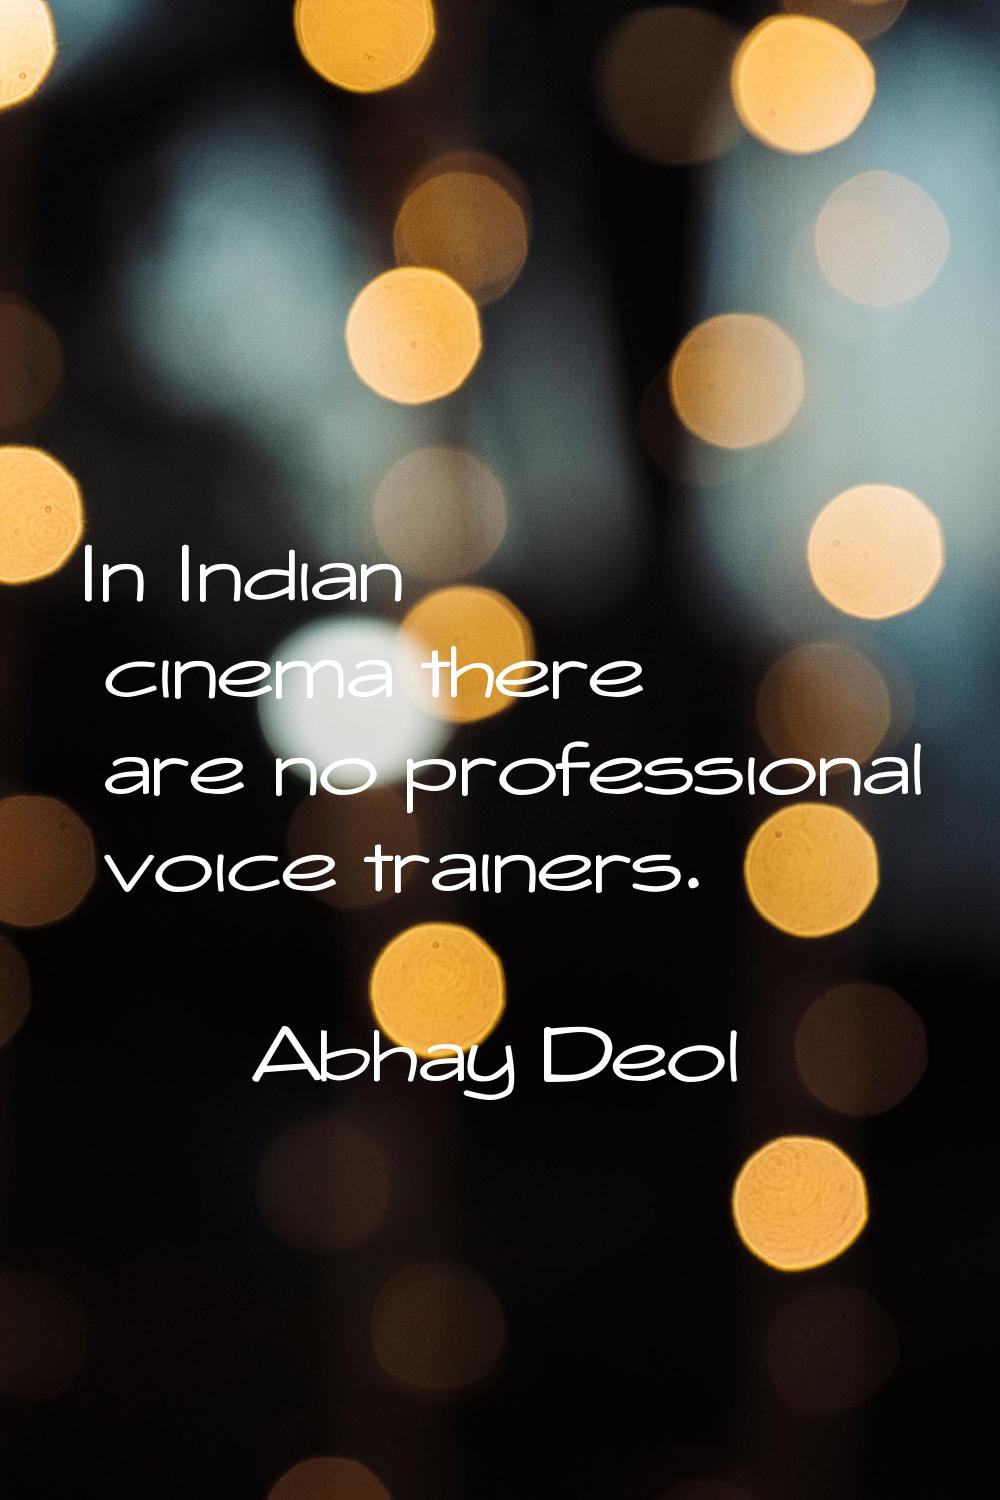 In Indian cinema there are no professional voice trainers.